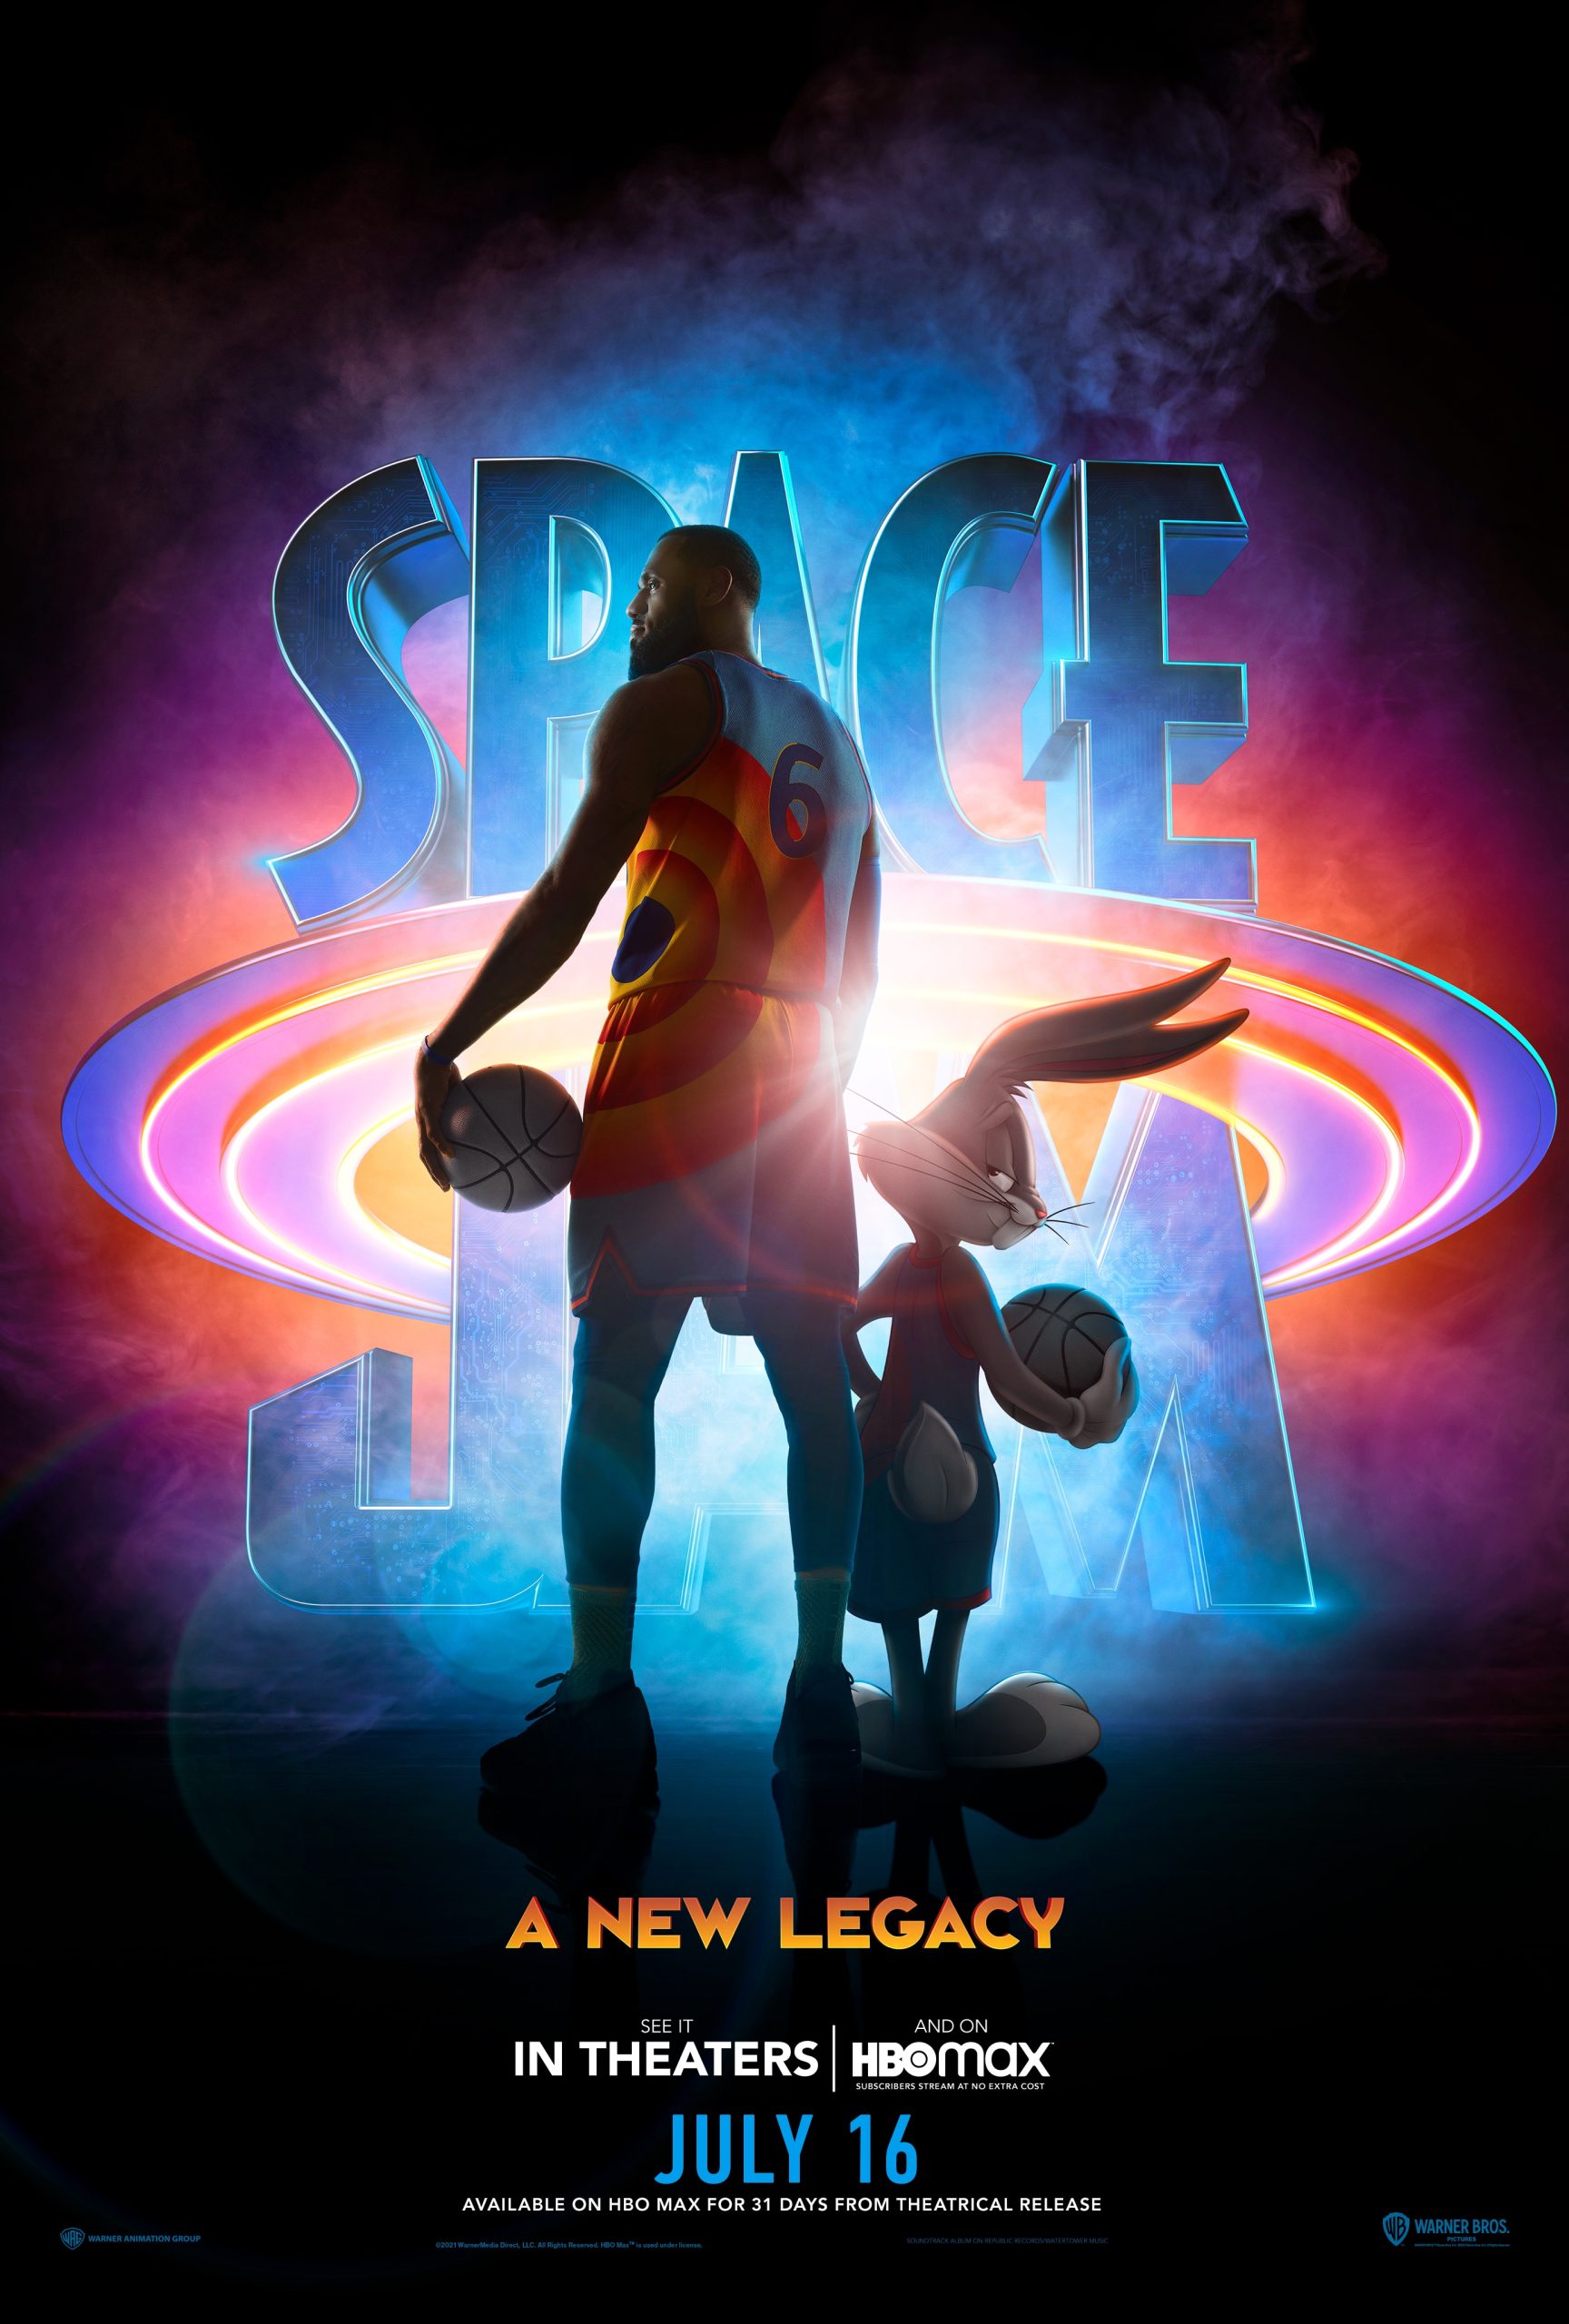 Cedric Joe on playing LeBron James' son in Space Jam: A New Legacy